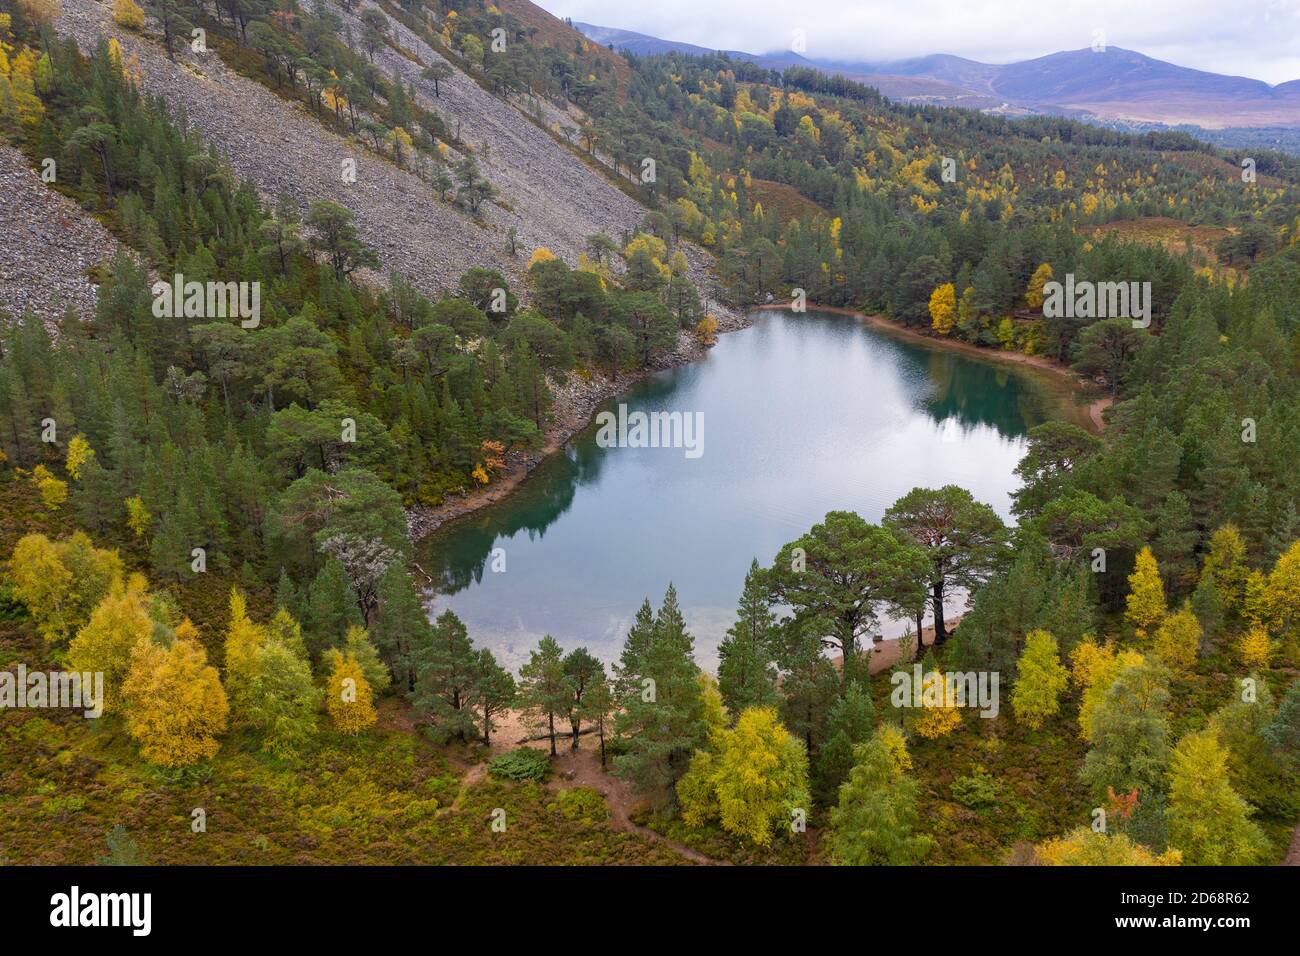 Autumn aerial view of An Lochan Uaine  (Green Loch) due to the striking green colour of it's water in Cairngorms National Park, Scotland,UK Stock Photo